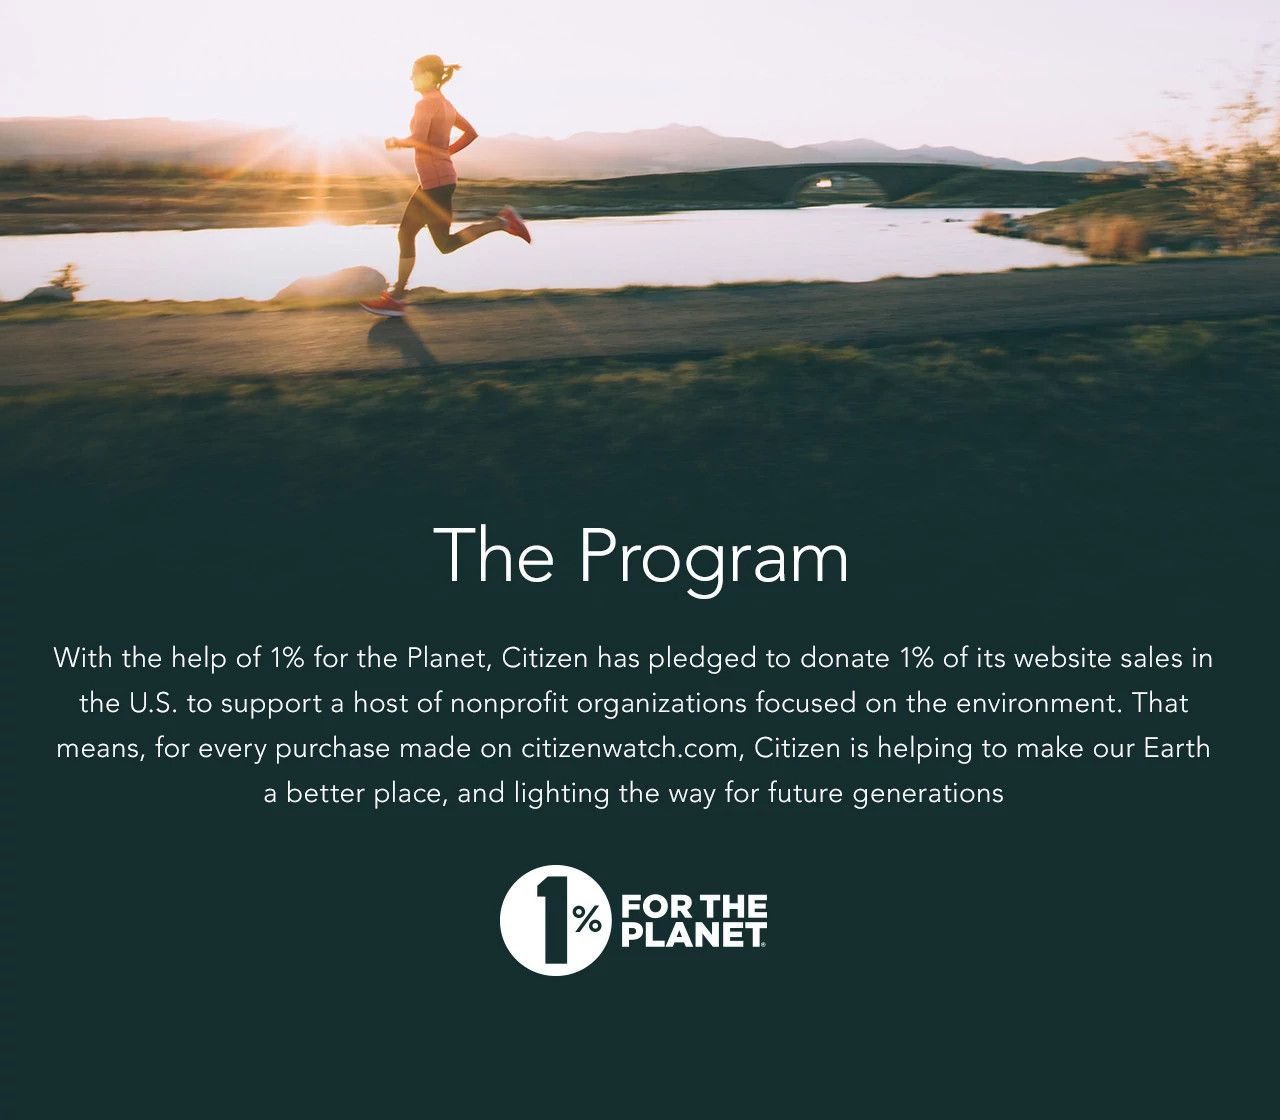 The Program: With the help of 1% for the Planet, Citizen has pledged to donate 1% of its website sales in the U.S. to support a host of nonprofit organizations focused on the environment. That means, for every purchase made on citizenwatch.com, Citizen is helping to make our Earth a better place, and lighting the way for future generations. 